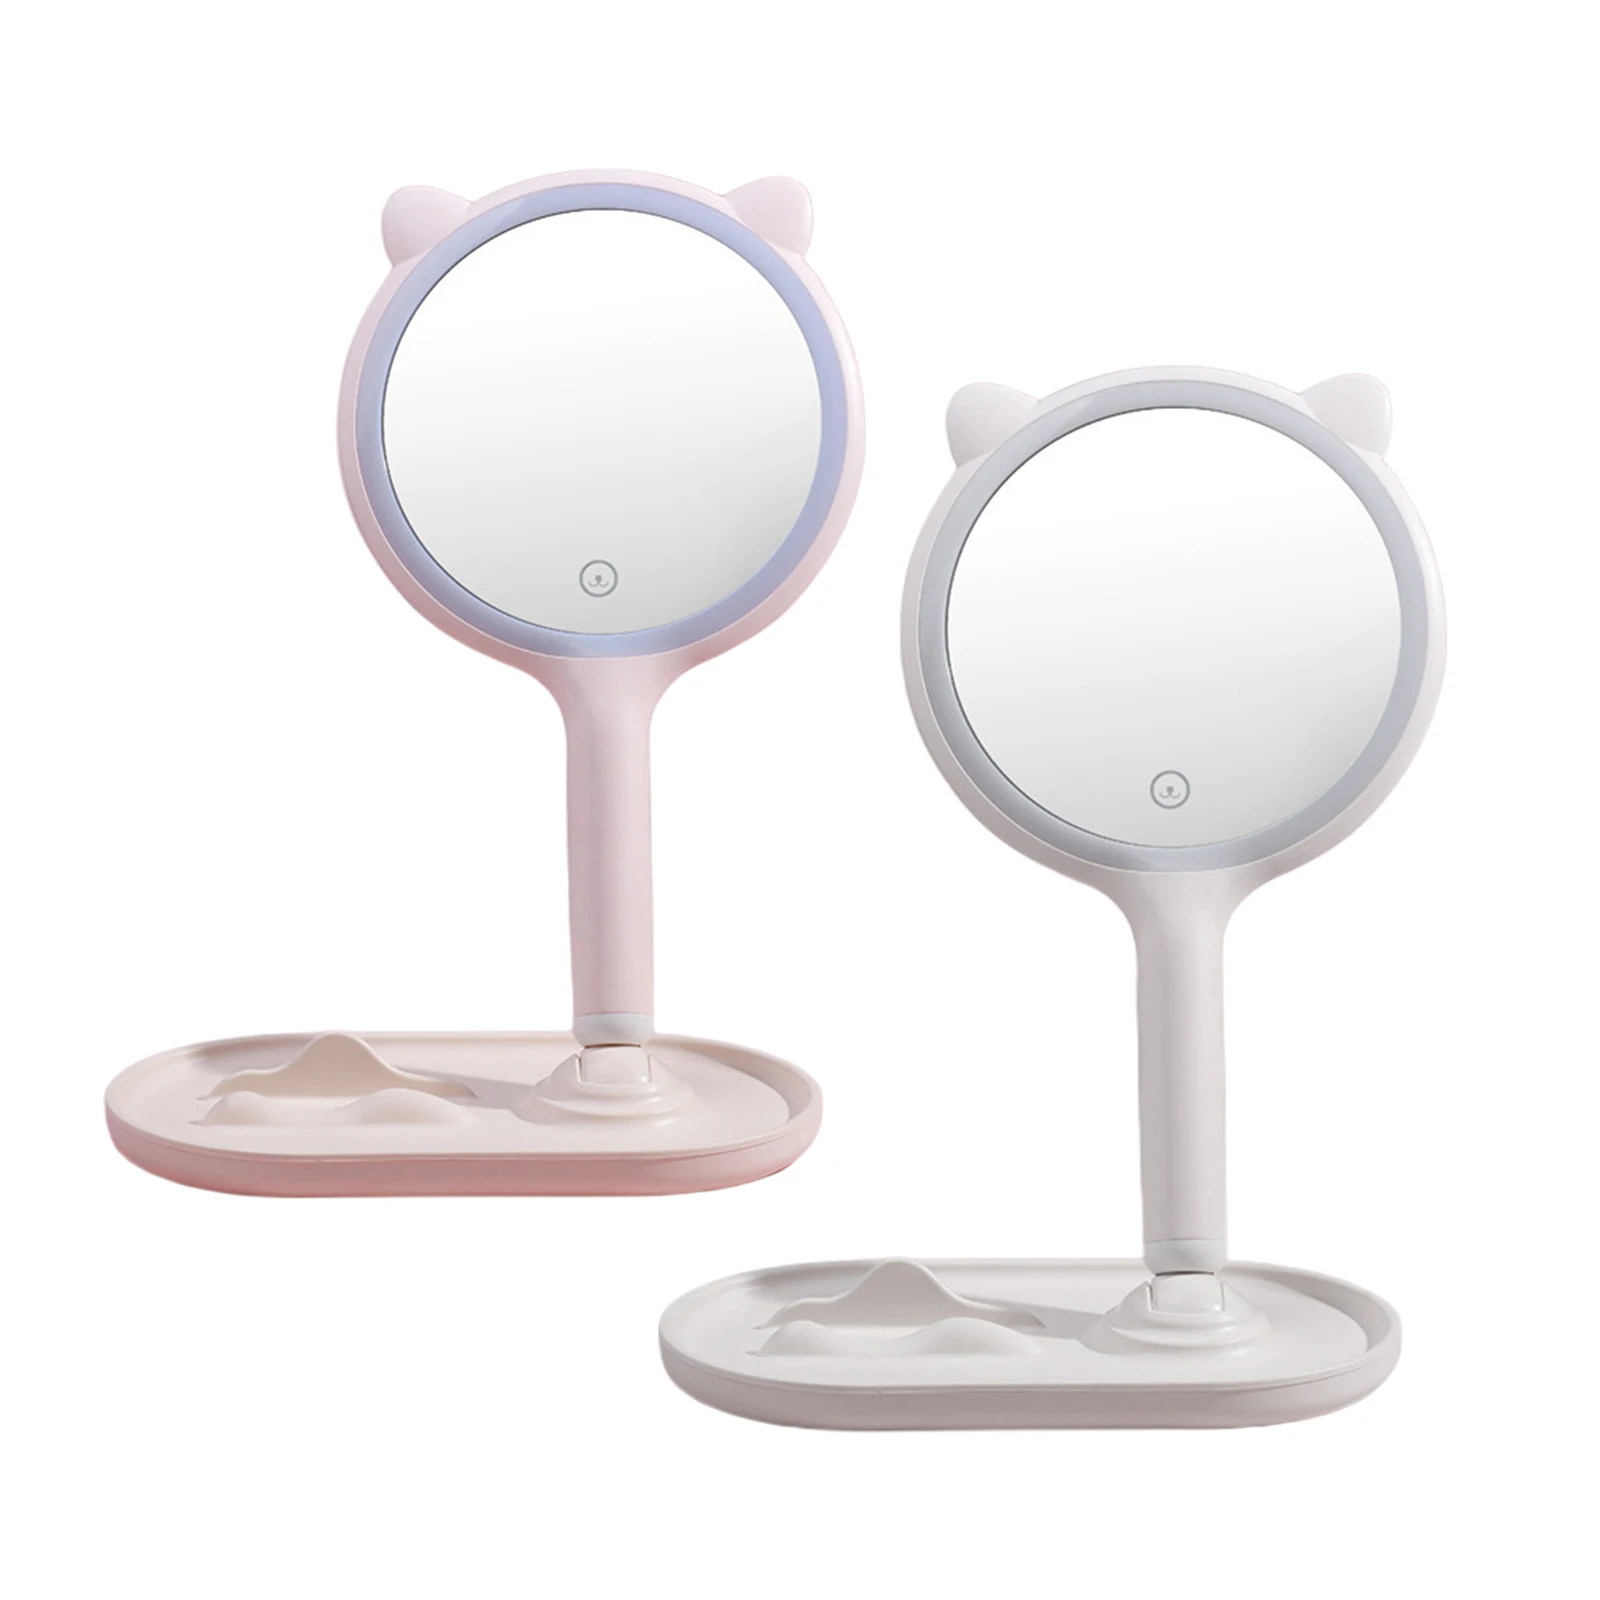 Cute LED Makeup Mirror Handheld Double-Side Dimmable Touch Sensor for Vanity